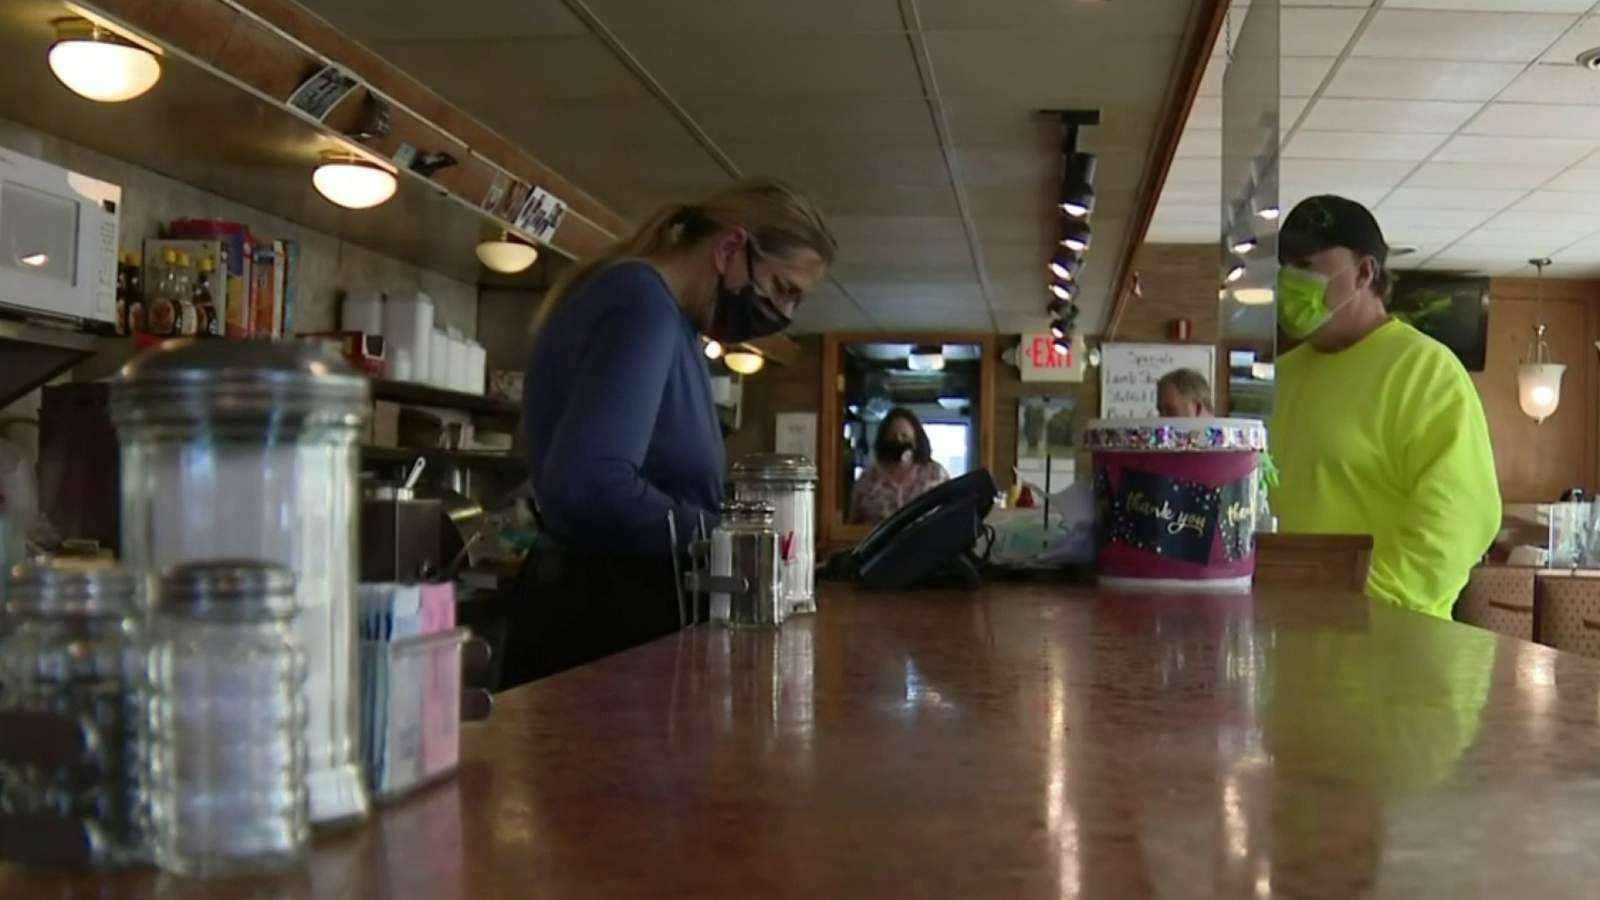 Betty Ross II restaurant in Madison Heights reaches out to community for help to stay afloat during pandemic